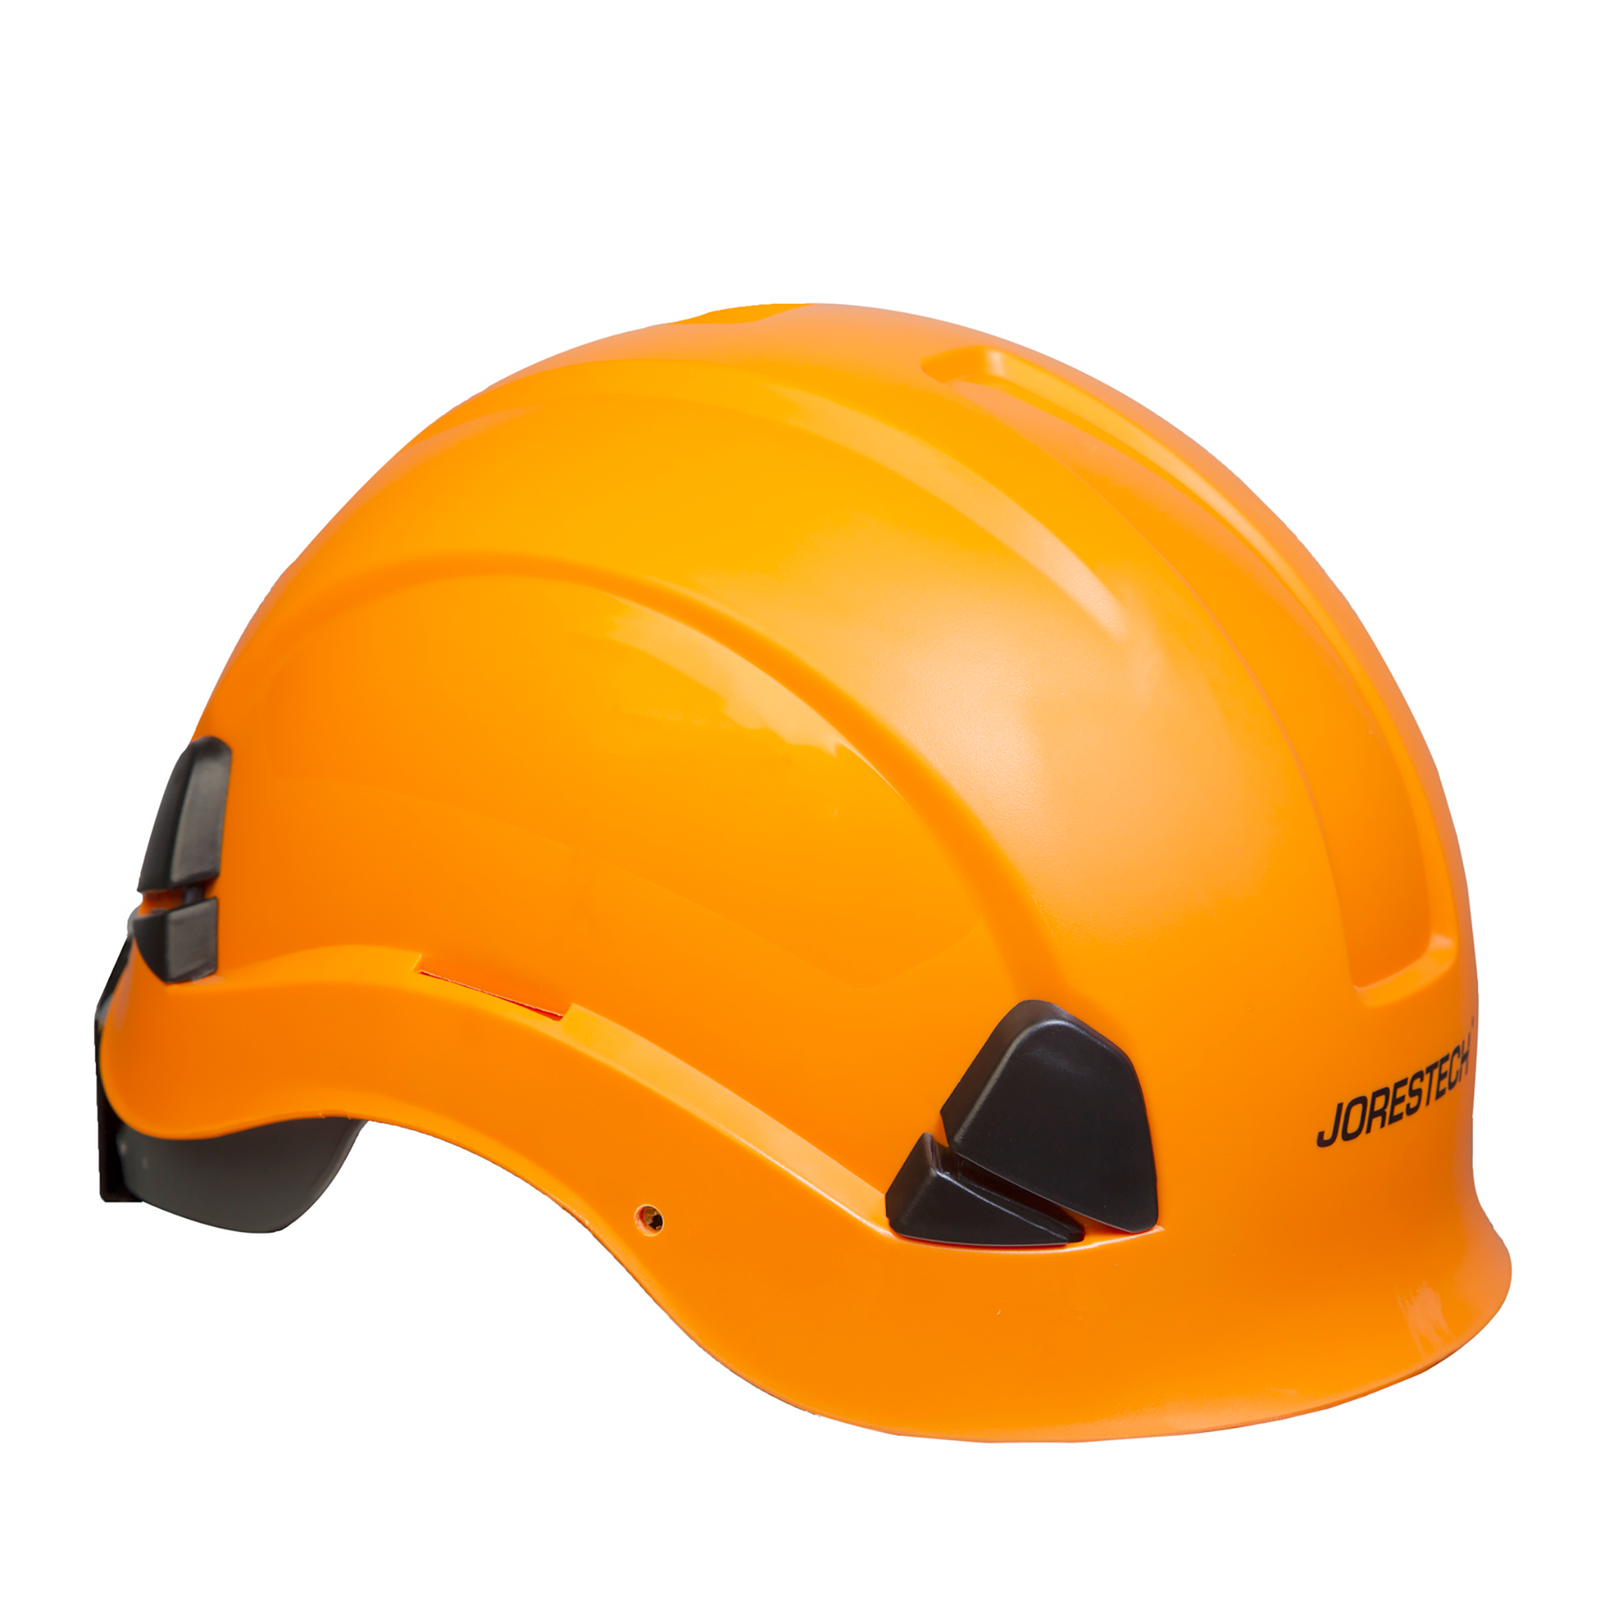 Orange JORESTECH® rescue hard hat with adjustable 6 point suspension . Also features holes to place face and eye shield, slots for earmuffs and clamps for head lights